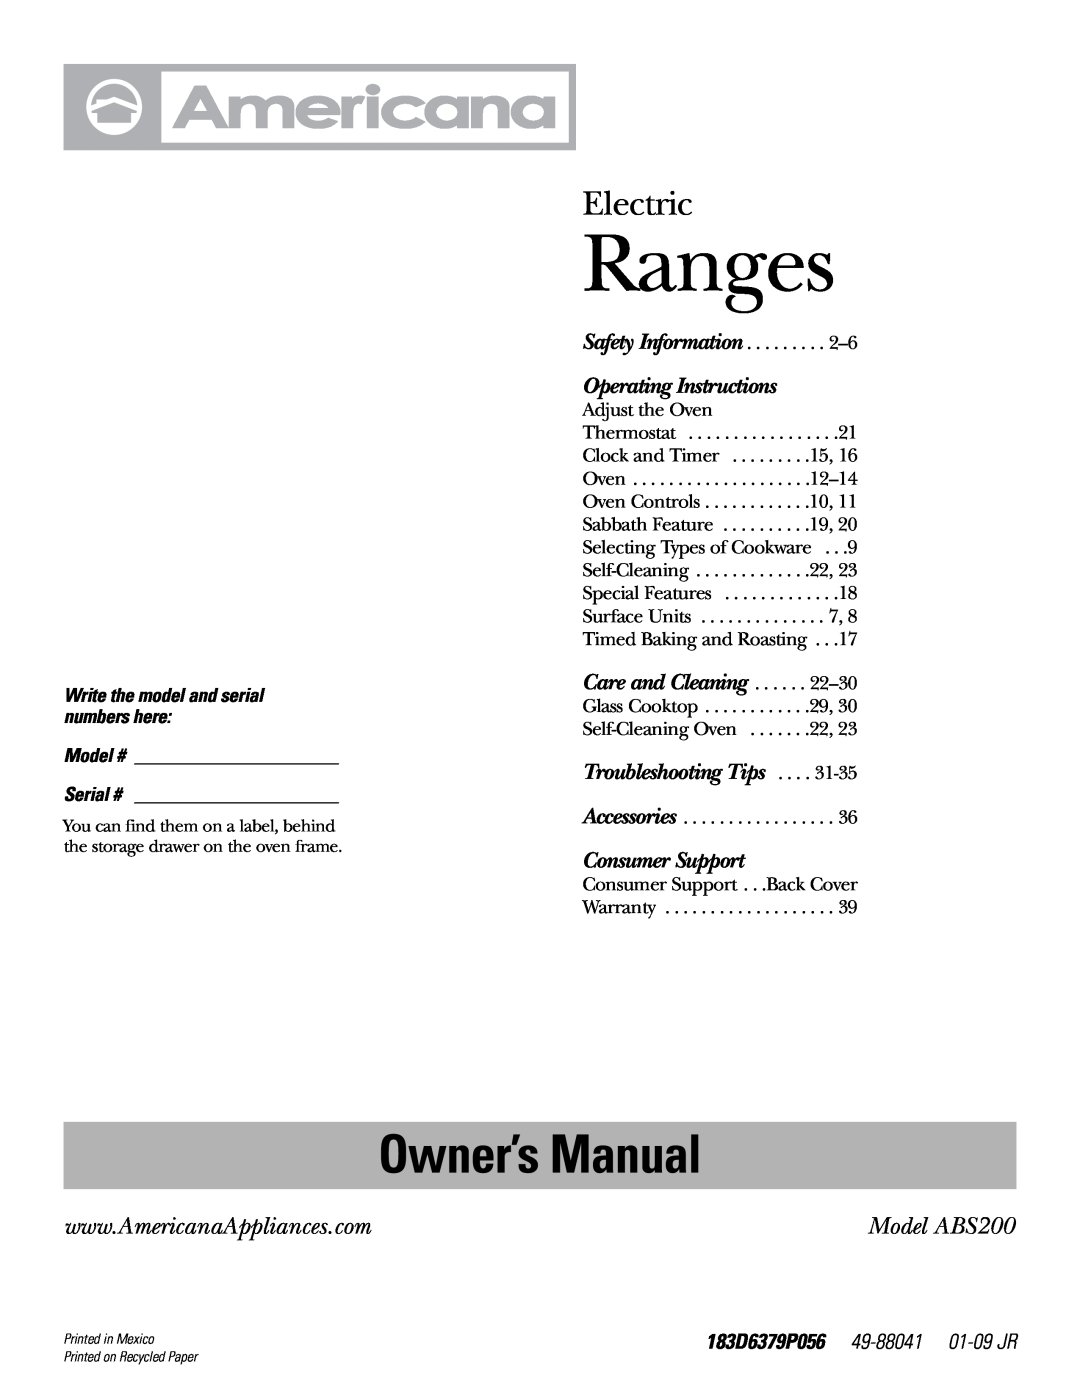 Americana Appliances owner manual 183D6379P056 49-88041 01-09 JR, Ranges, Electric, Model ABS200, Care and Cleaning 